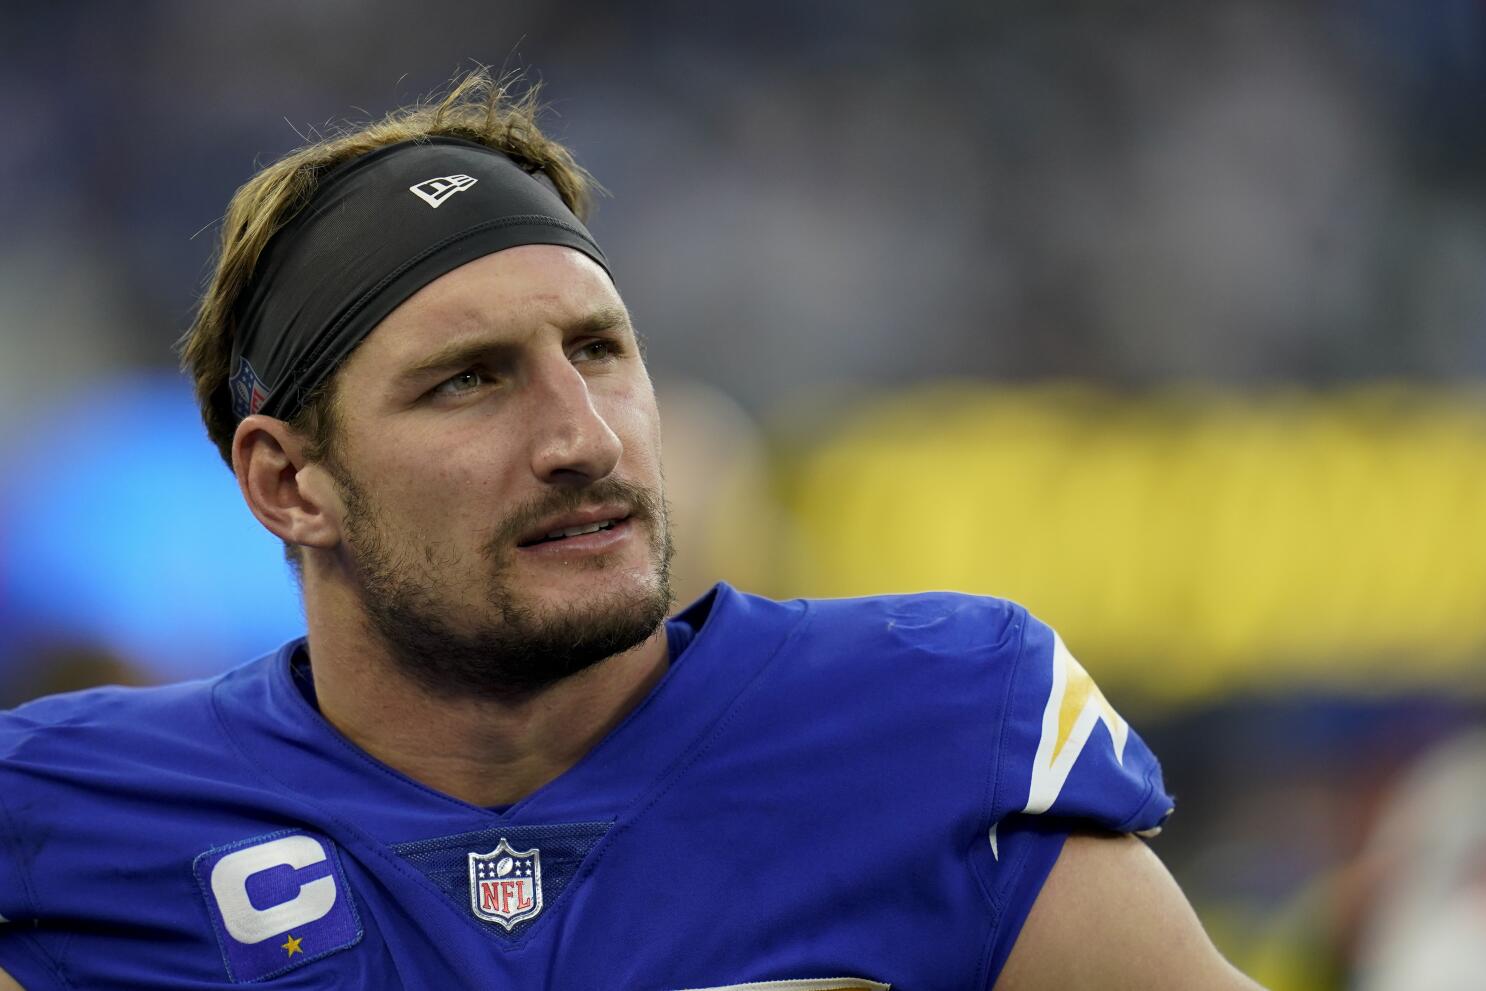 Chargers Defensive End Joey Bosa Set to Face Off Against Cousin